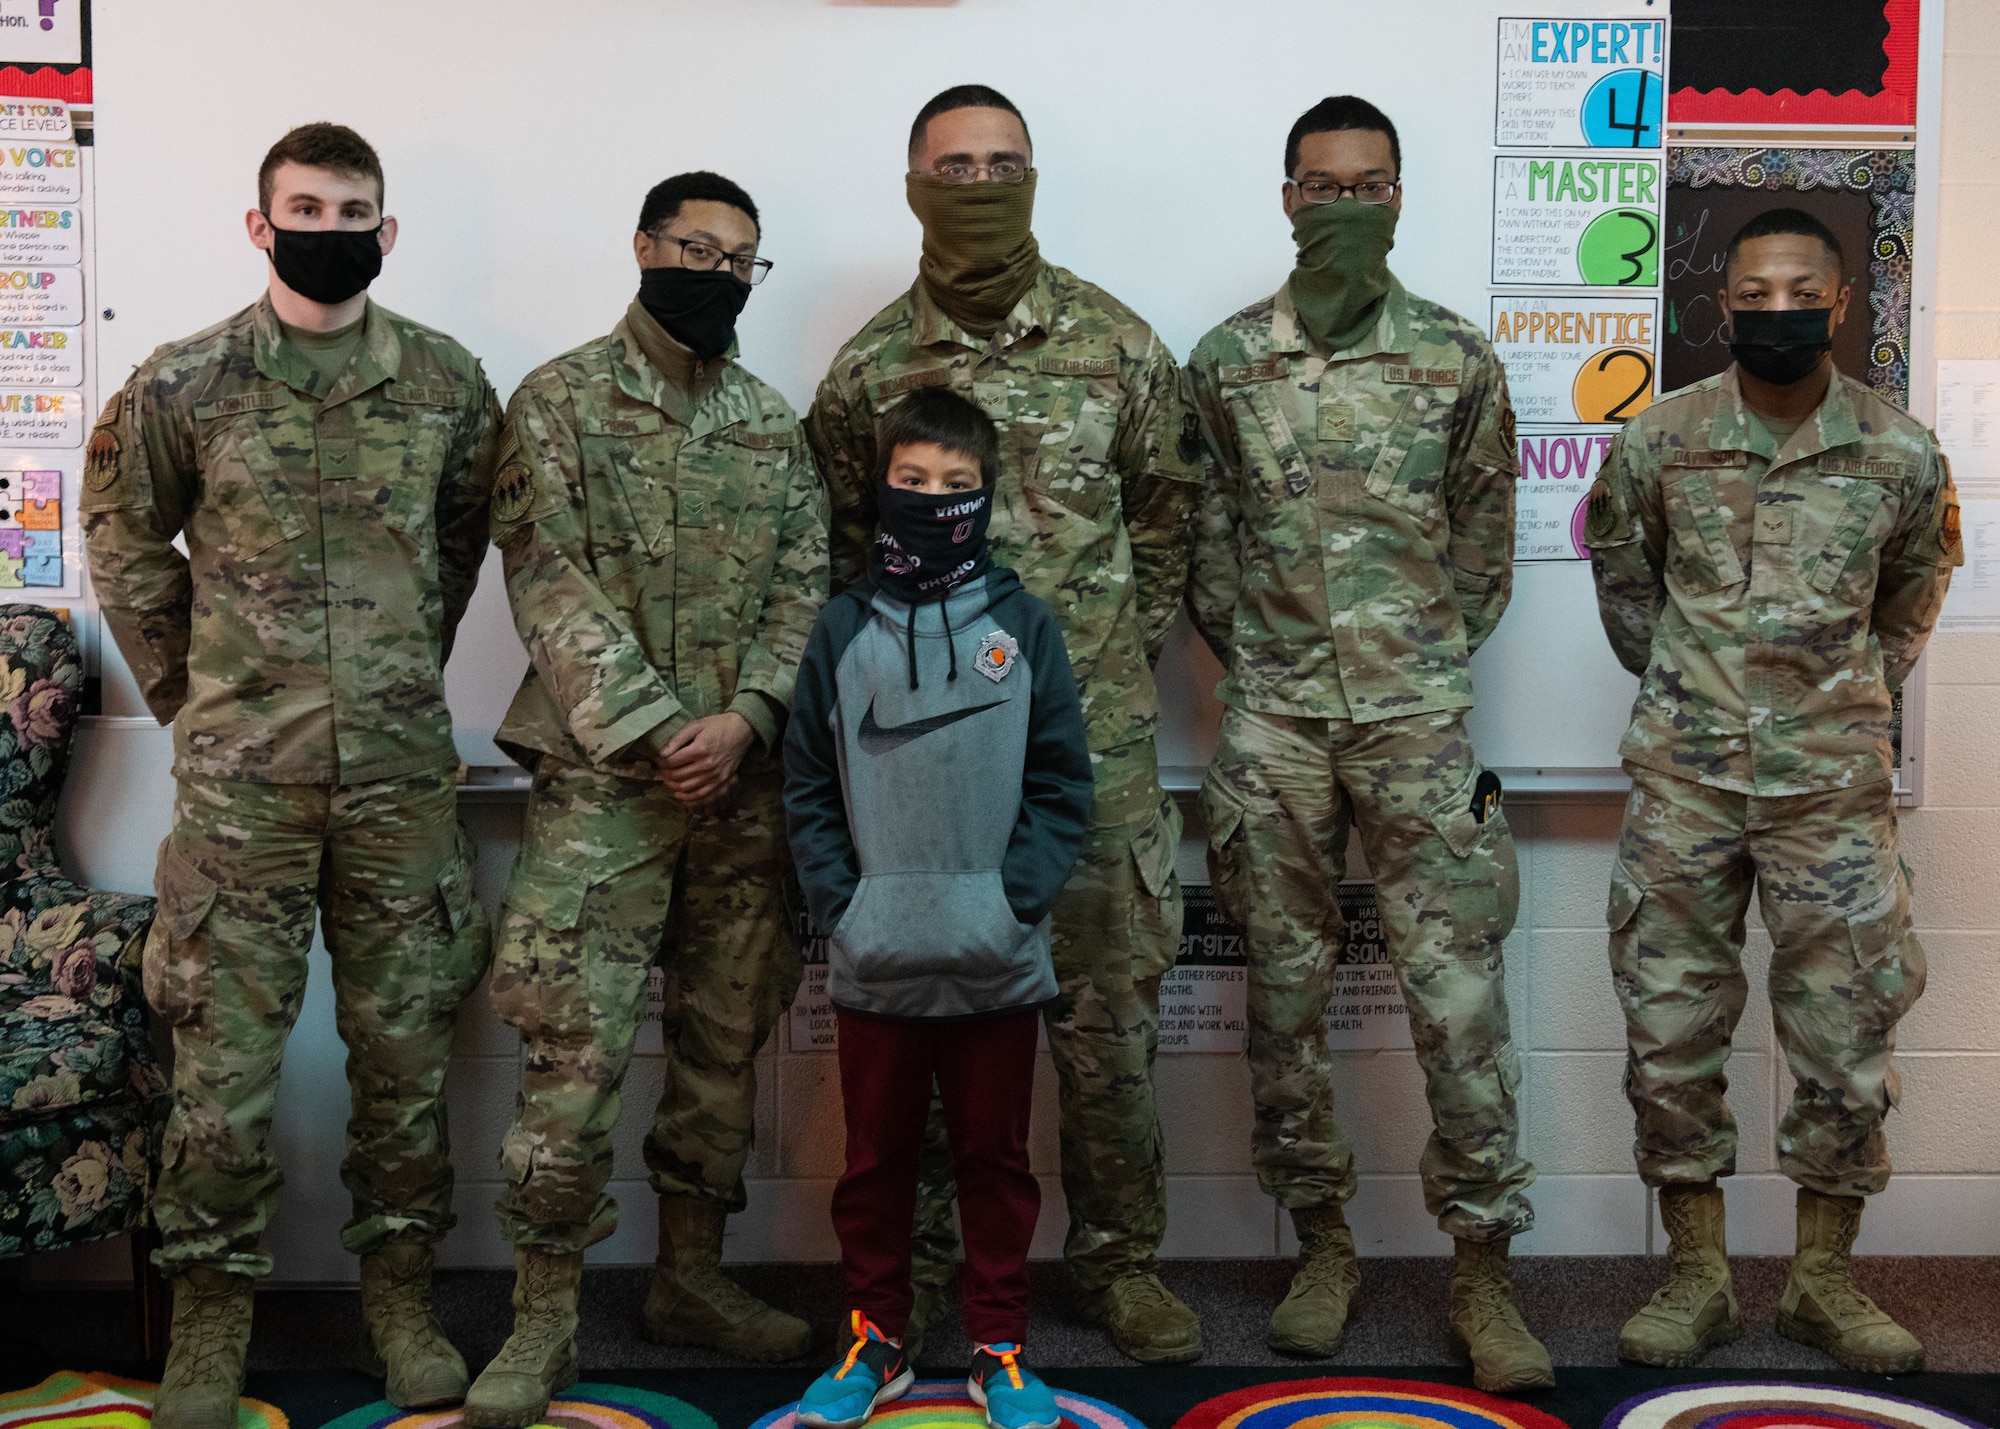 509th Security Forces Squadron Airmen, stand with Omar, an elementary student at Whiteman Air Force Base, Missouri, on Feb. 26, 2021. Omar delivered a letter to security forces in
order to express his admiration for the career field. (U.S. Air Force Photo by Airman 1st Class Devan Halstead)